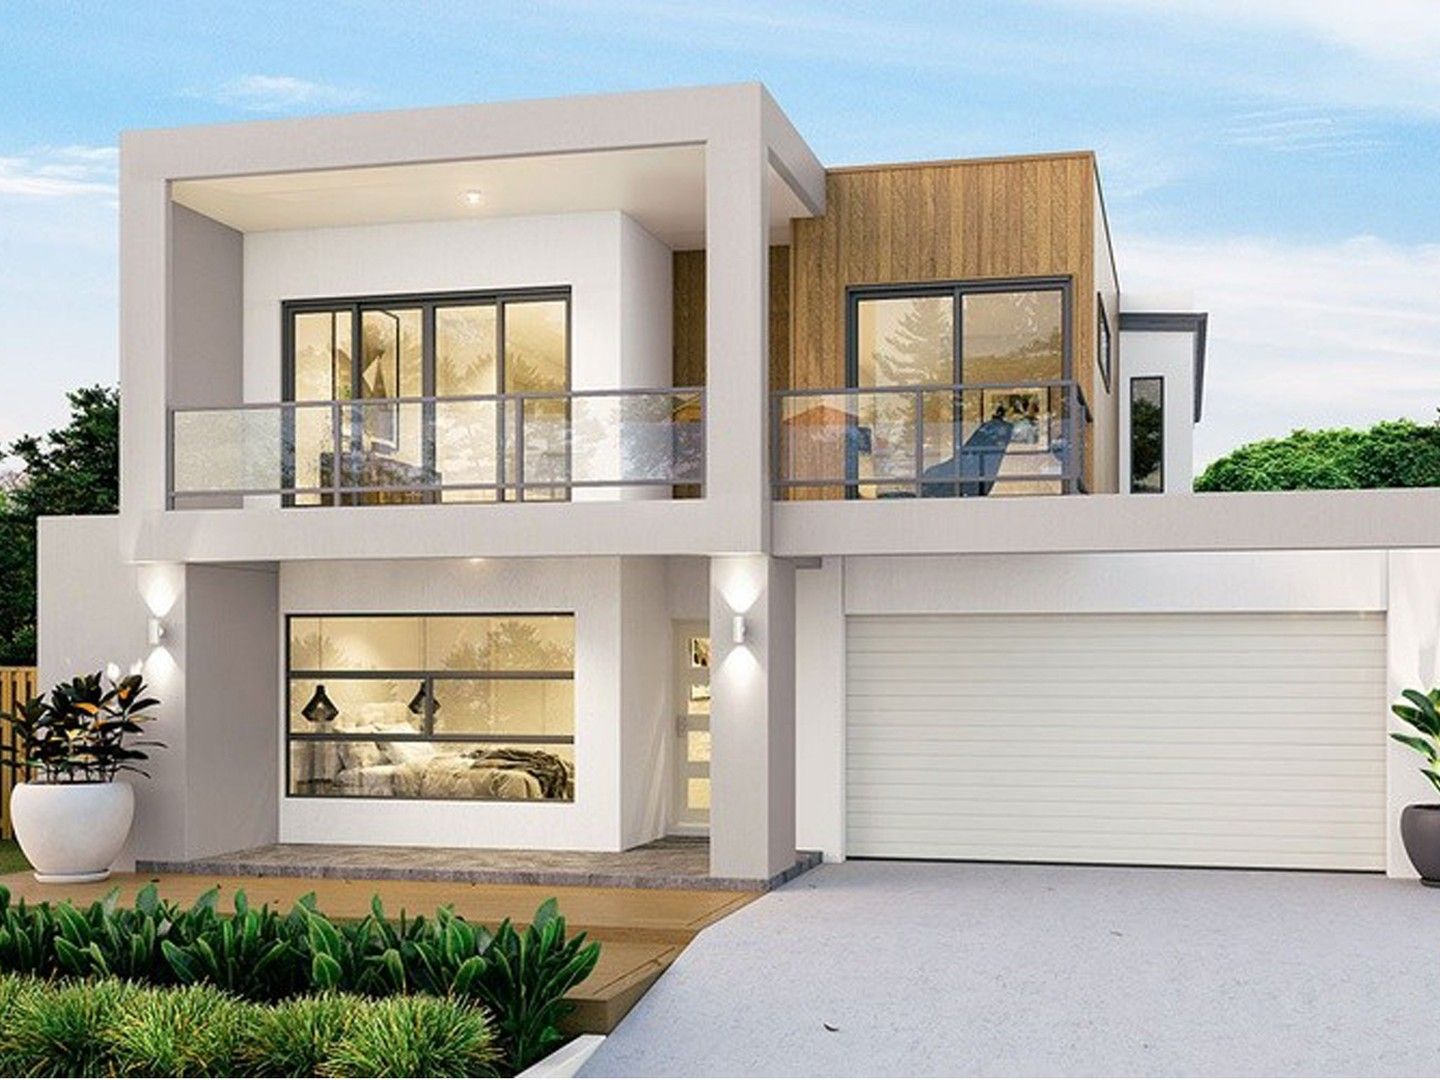 5 bedrooms New House & Land in Old Pitt Town Road BOX HILL NSW, 2765